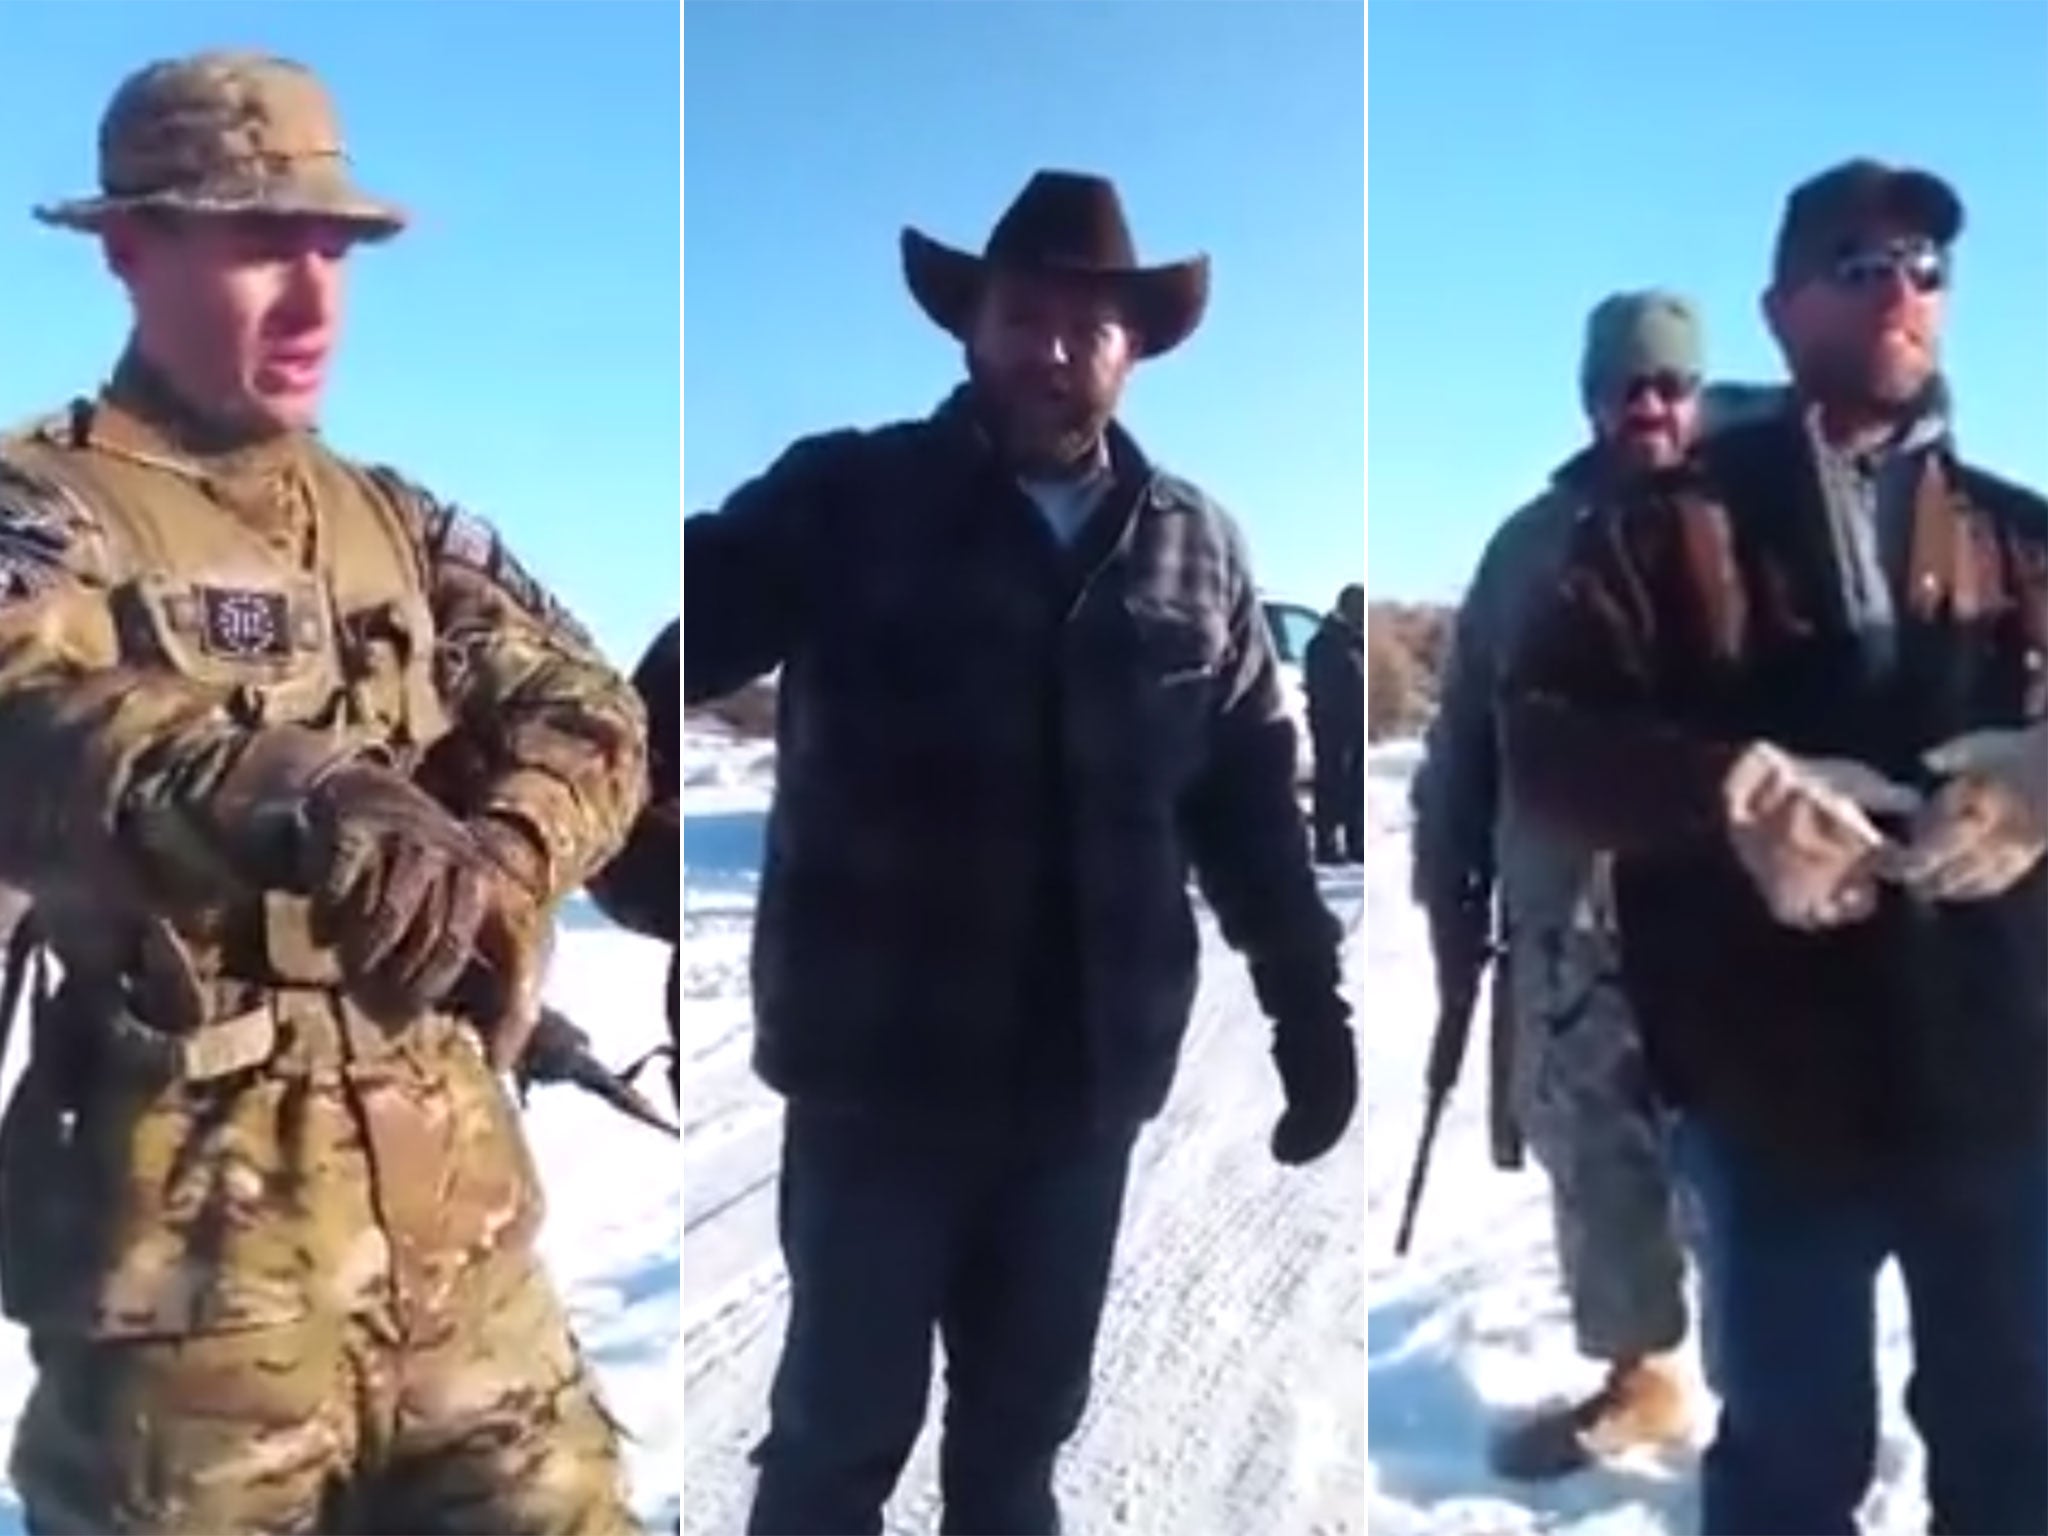 Video posted to social media showed the militia members declaring the start of a new 'movement'